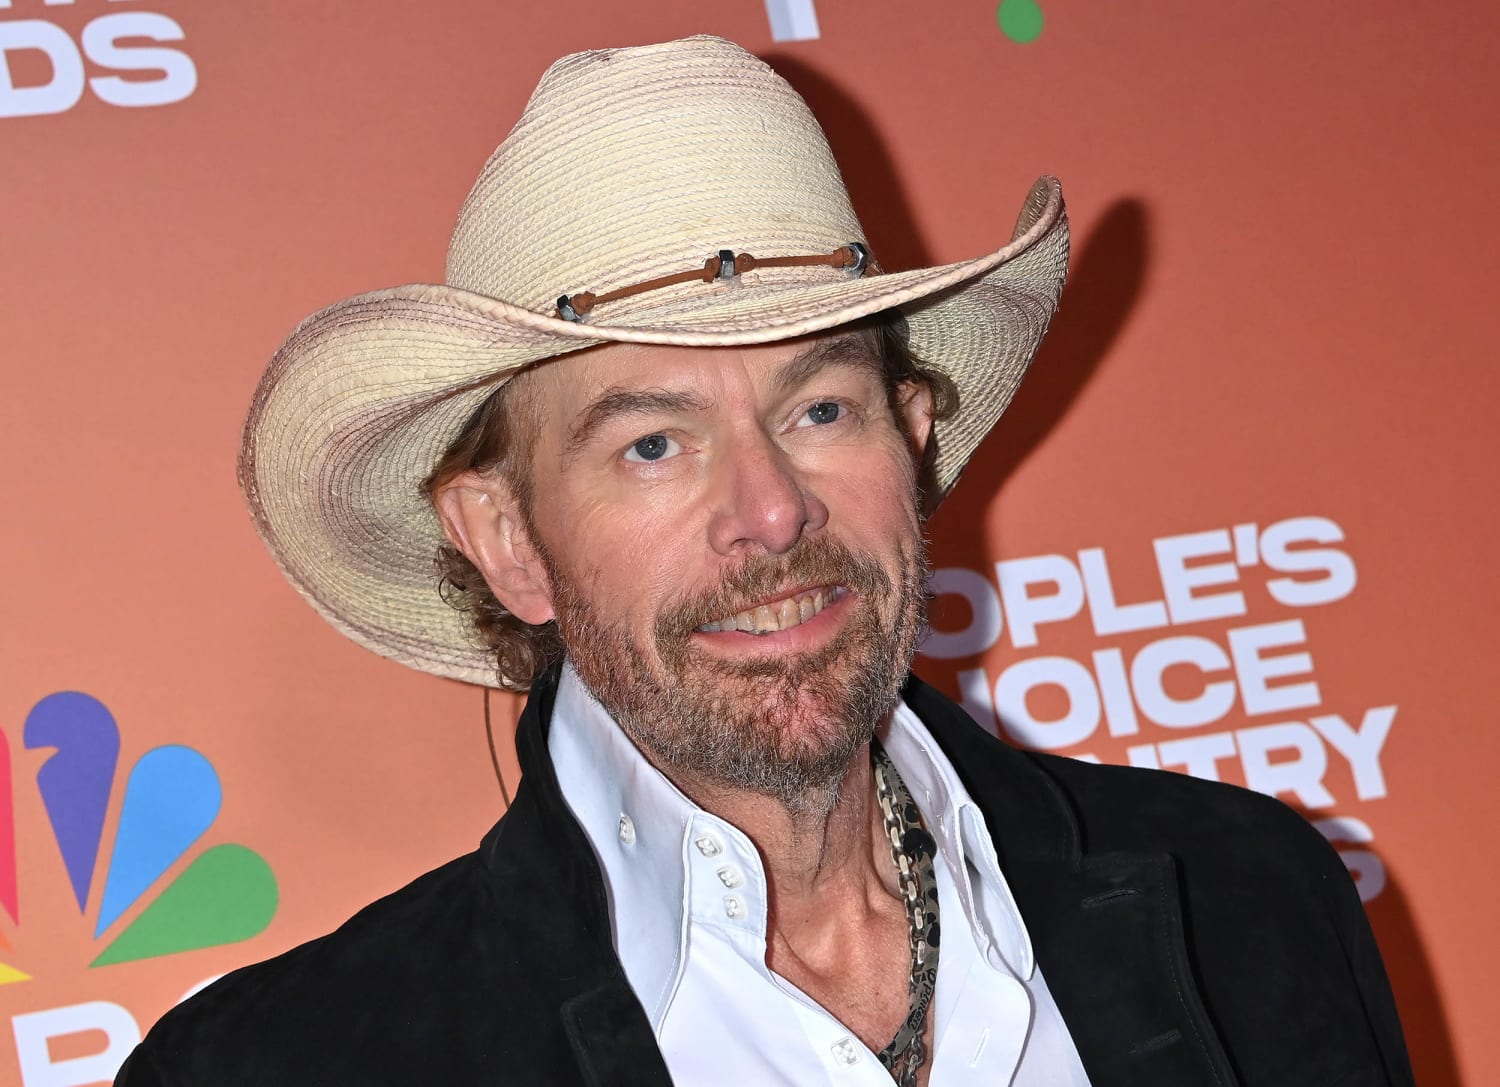 Toby Keith what's wrong with his health? 1